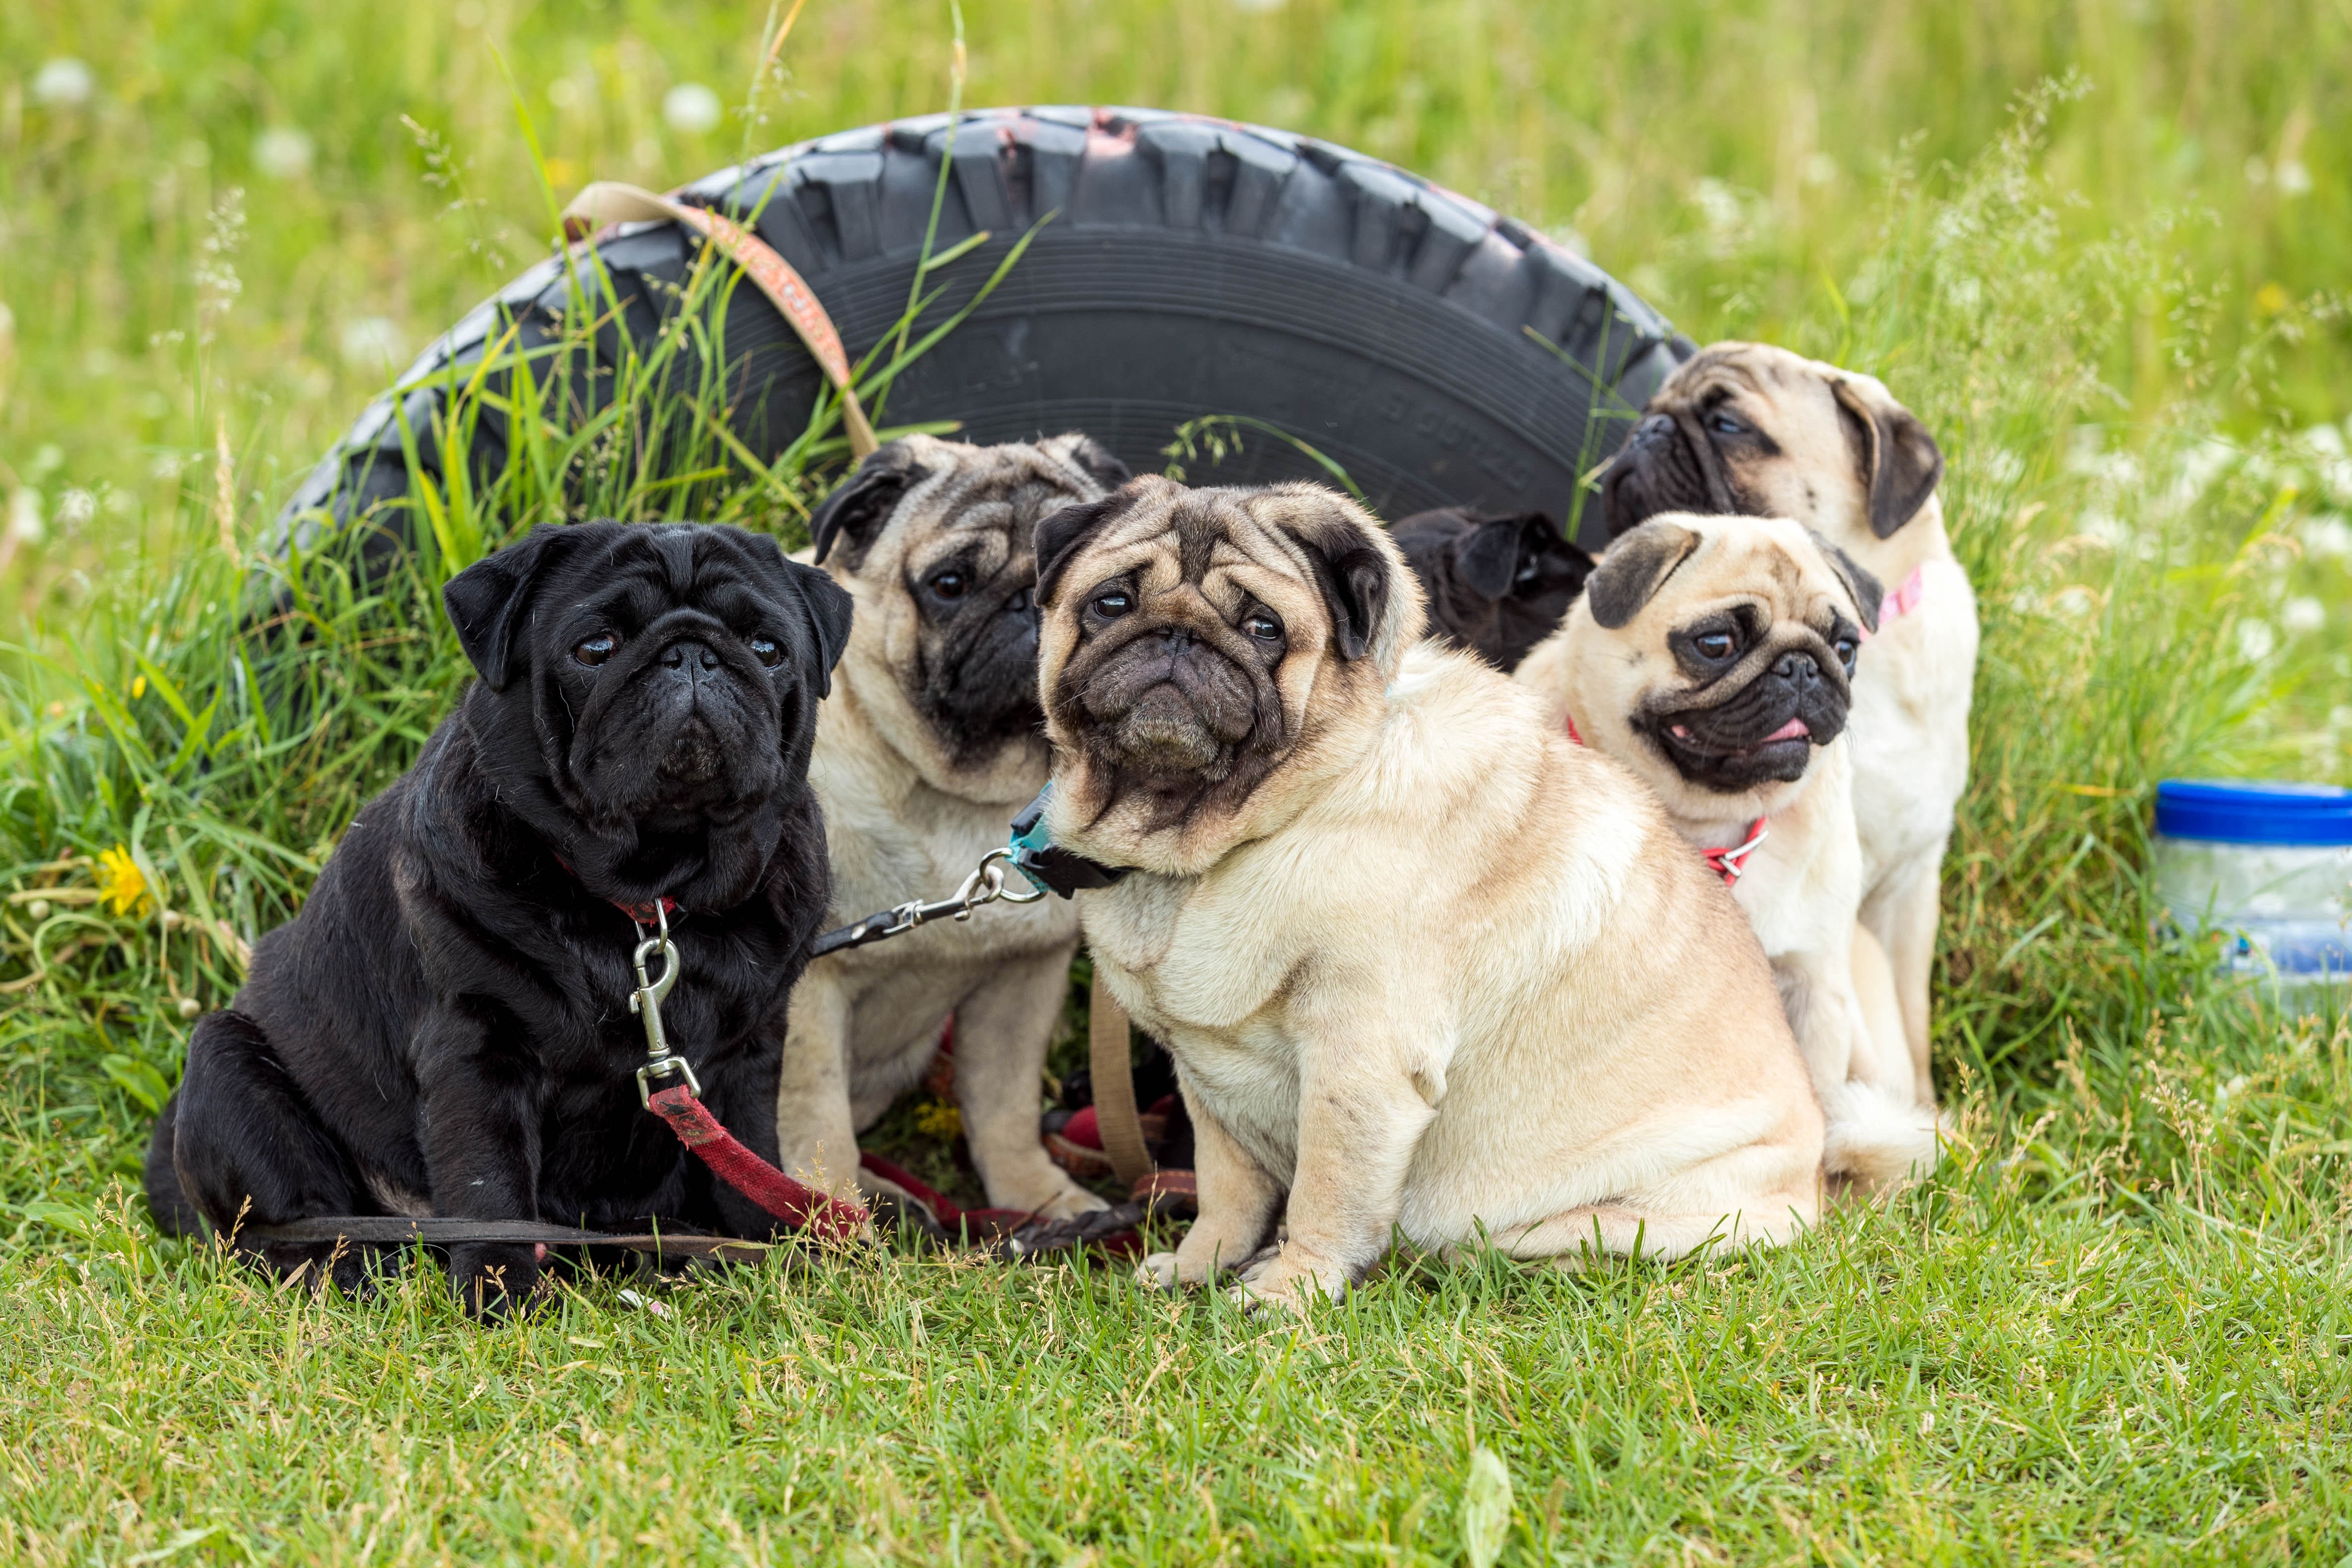 Pugs photos download the best free pugs stock photos hd images